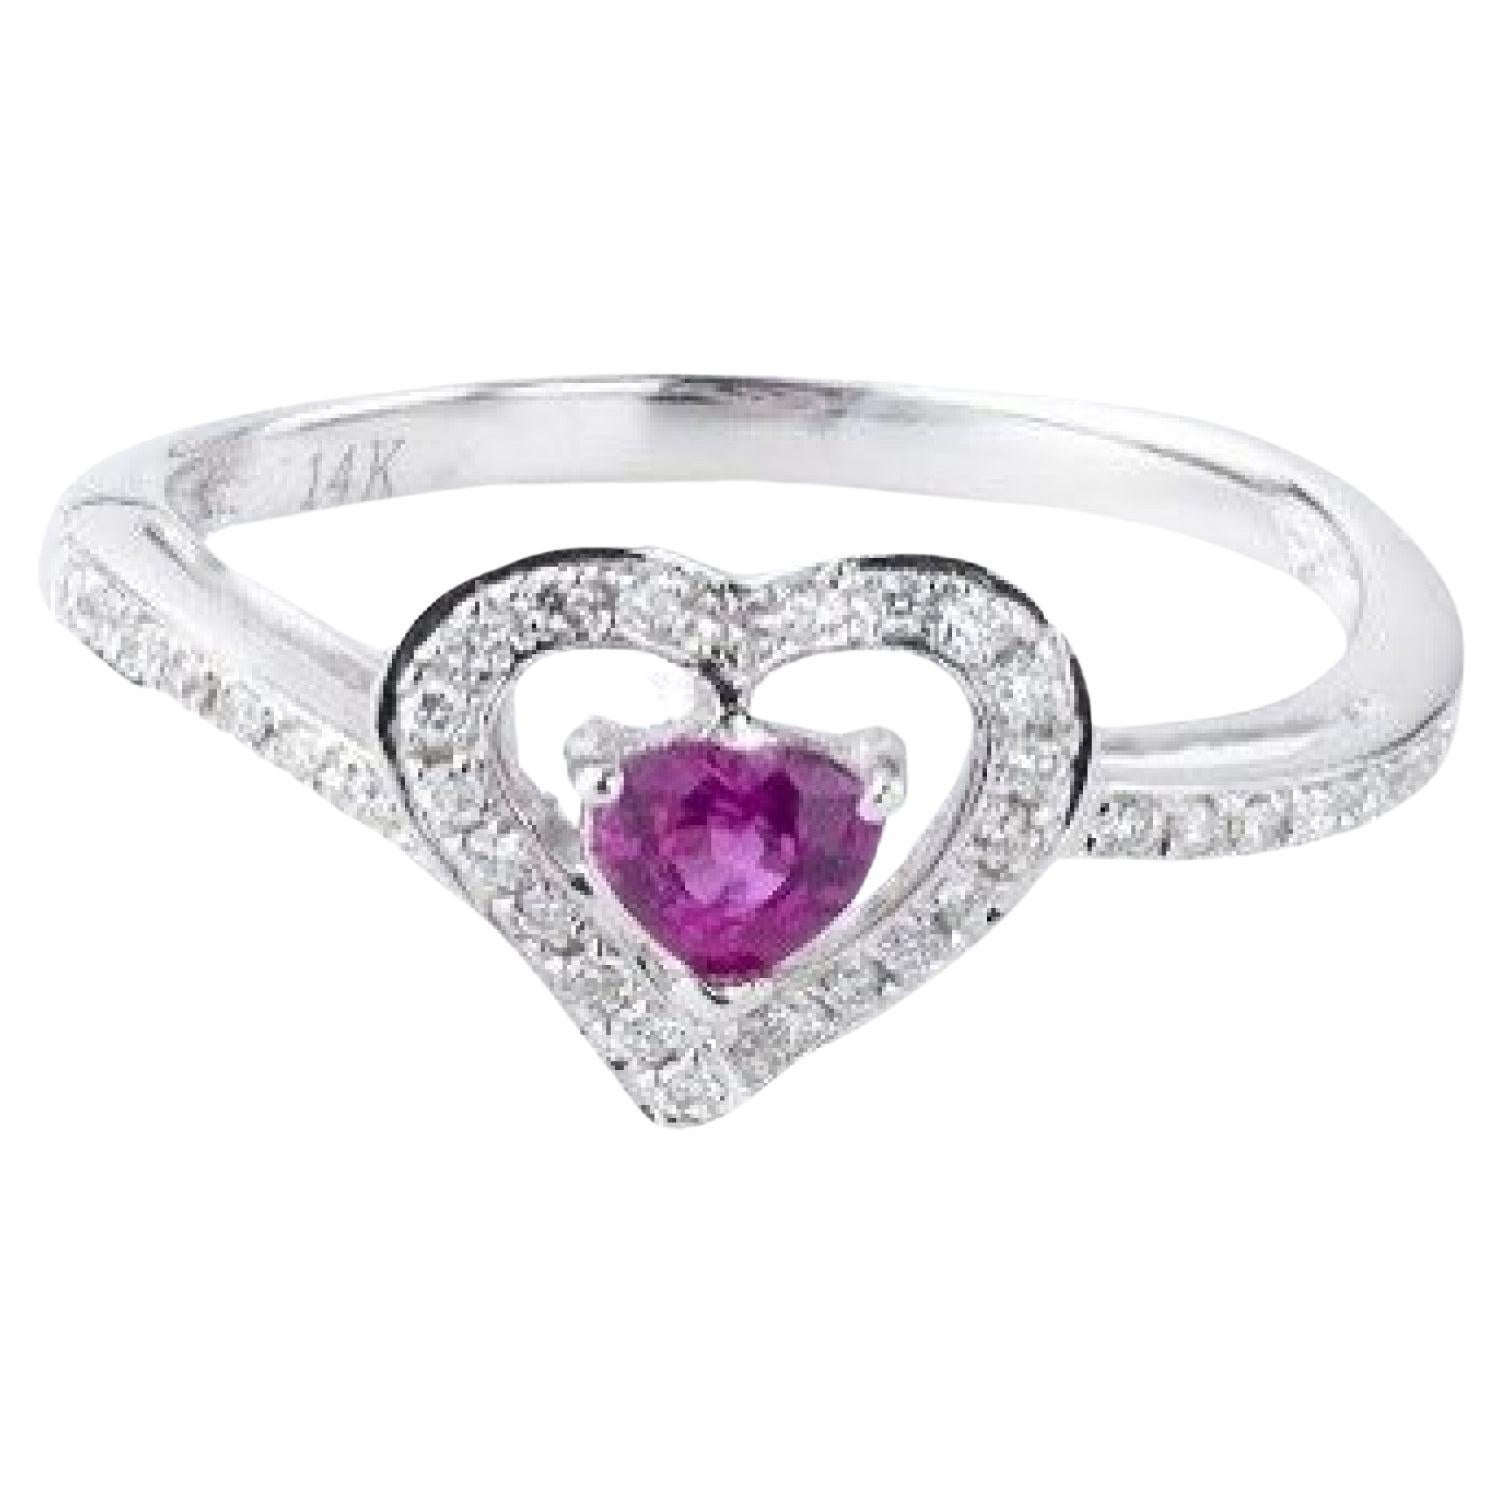 For Sale:  0.403 Carat Ruby and Diamond Heart Ring in 14 Karat White Gold